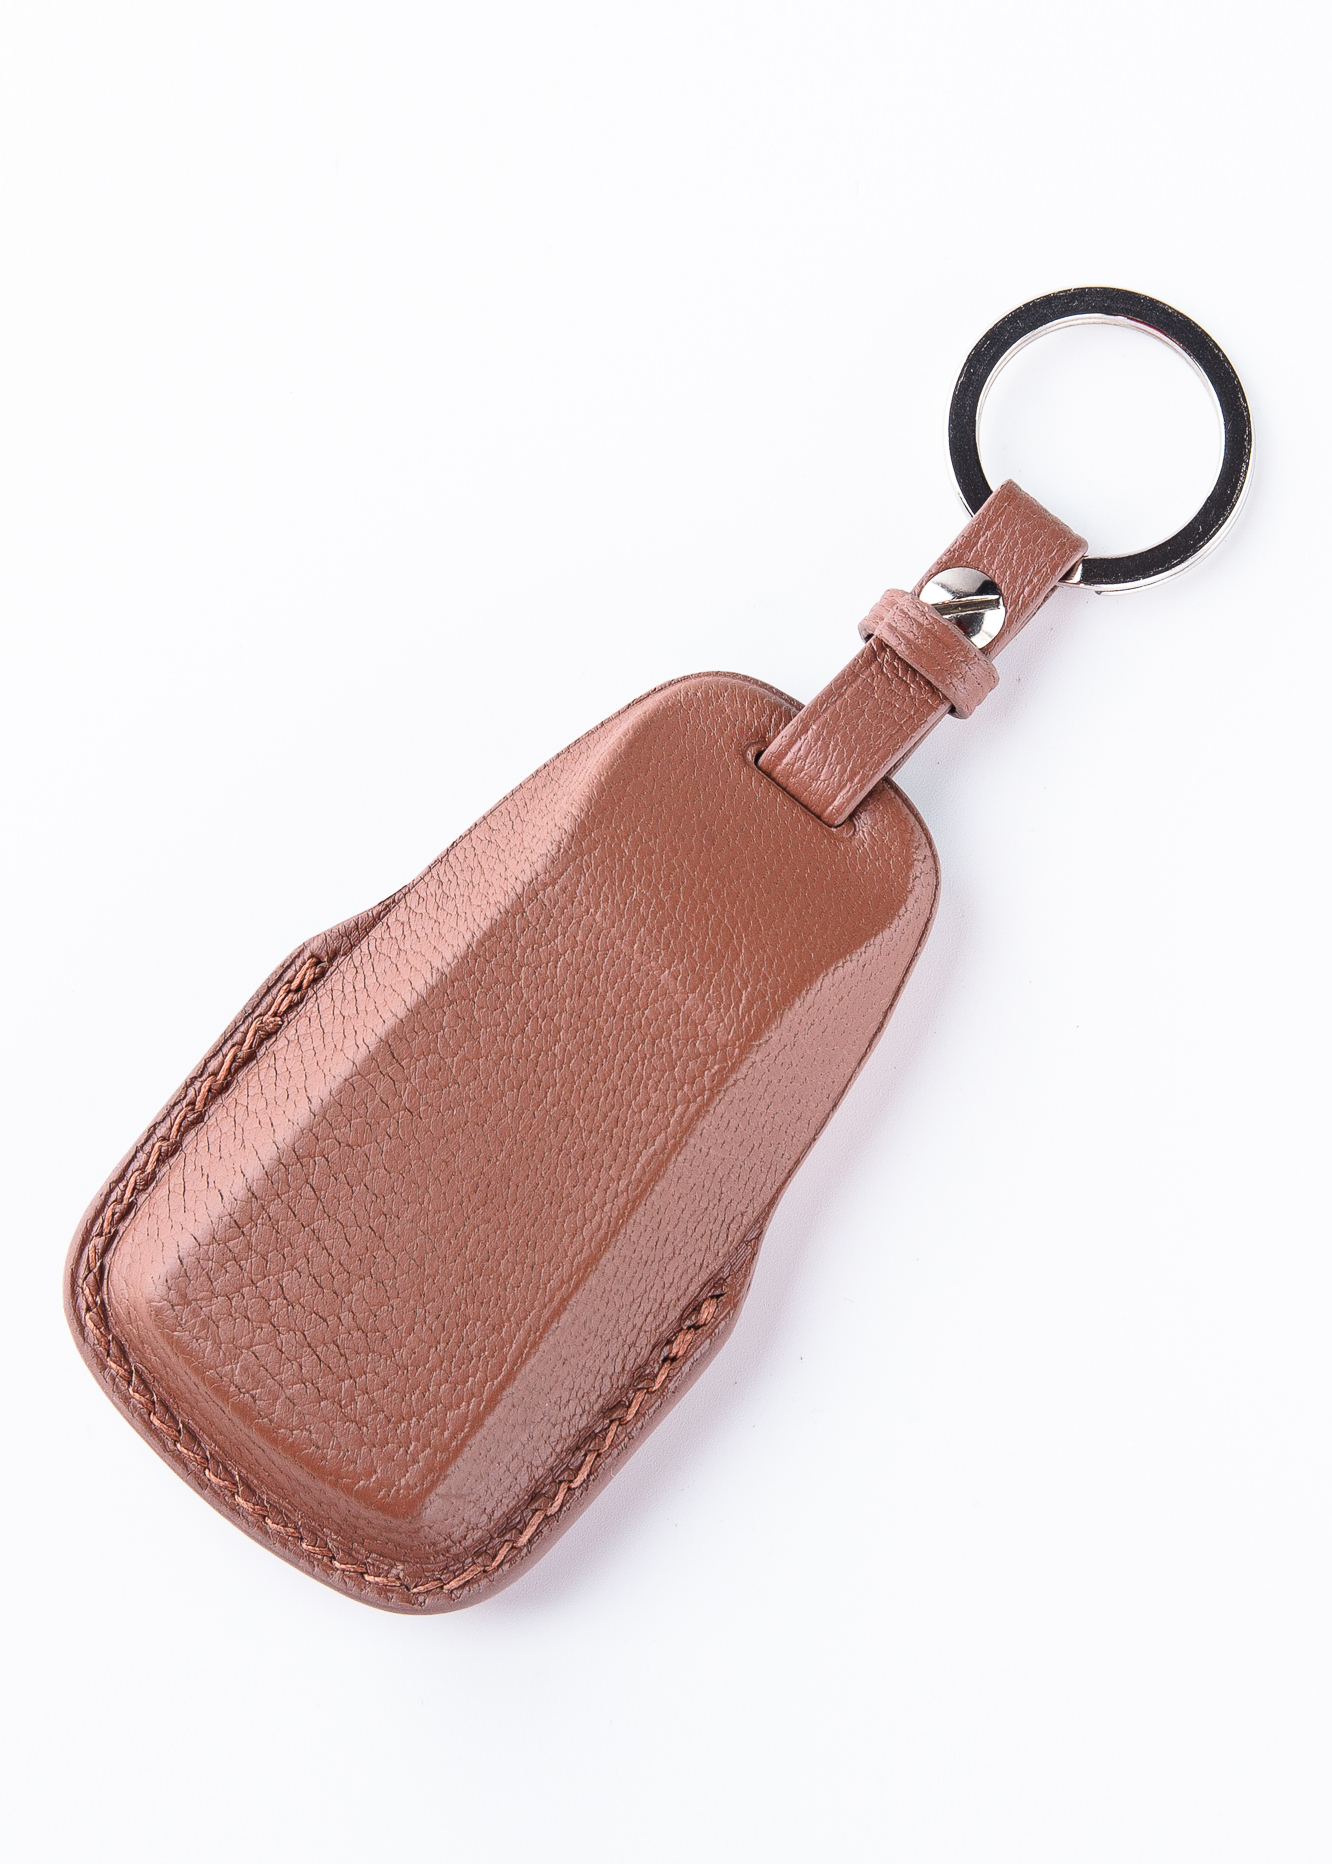 Timotheus for Audi key fob cover case, Compatible with Audi key case, Handmade Genuine Leather for Audi keychains | AU11